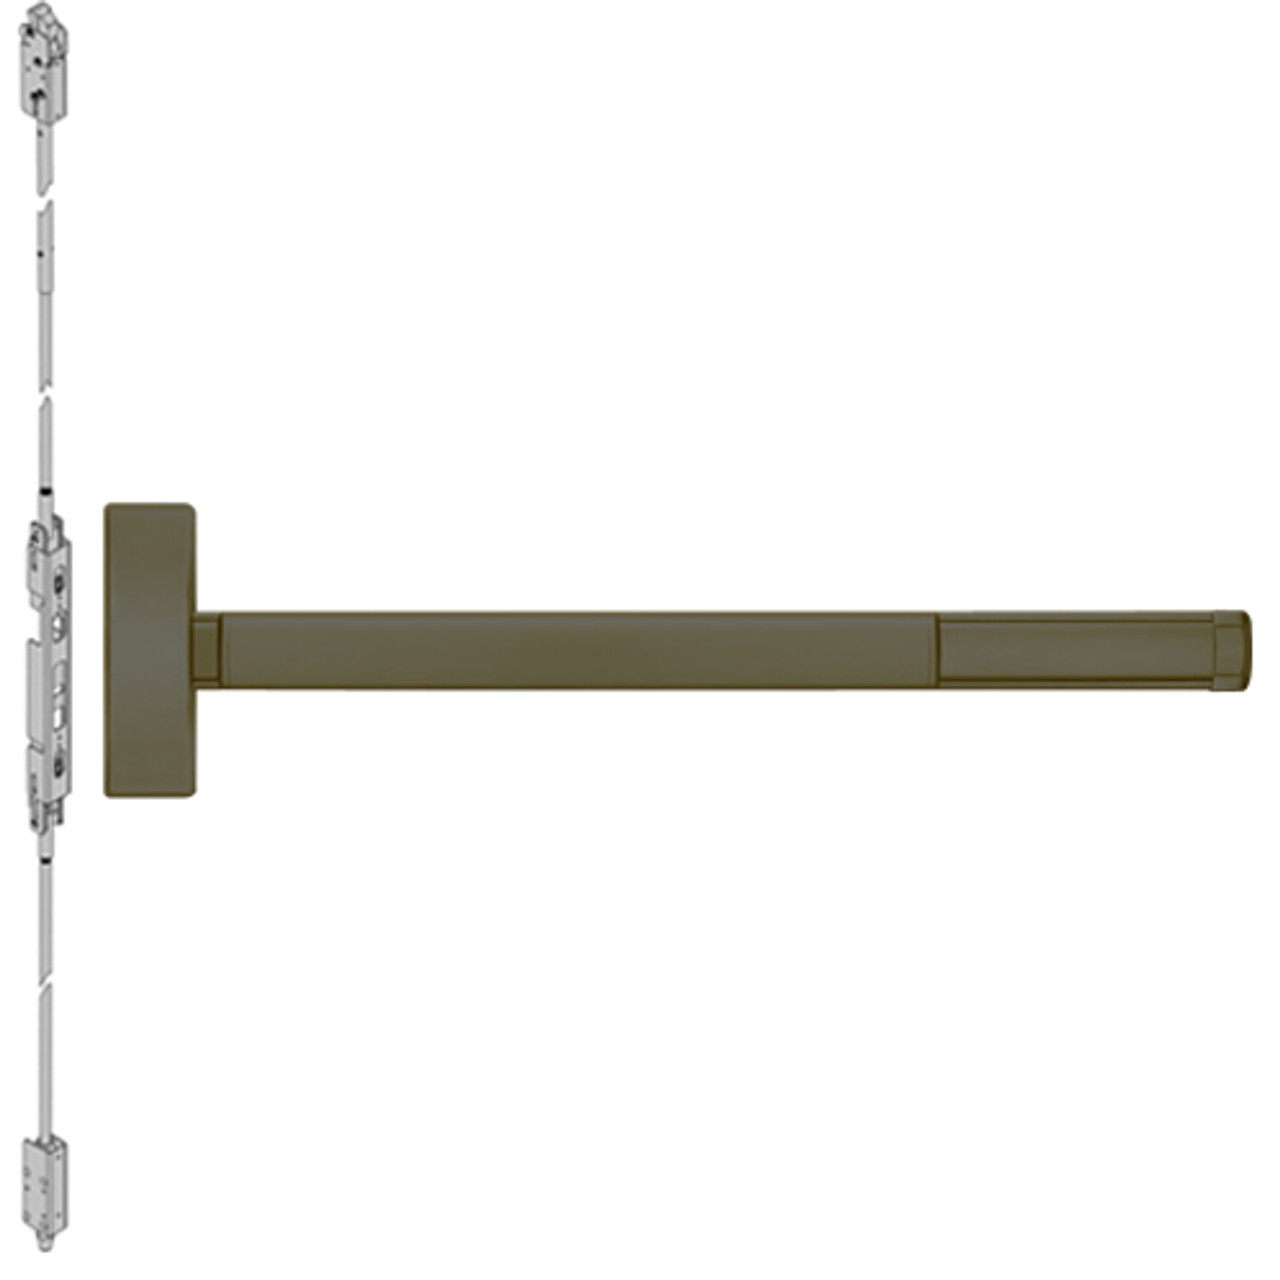 TSFL2802LBR-613-48 PHI 2800 Series Fire Rated Concealed Vertical Rod Exit Device with Touchbar Monitoring Switch Prepped for Dummy Trim in Oil Rubbed Bronze Finish